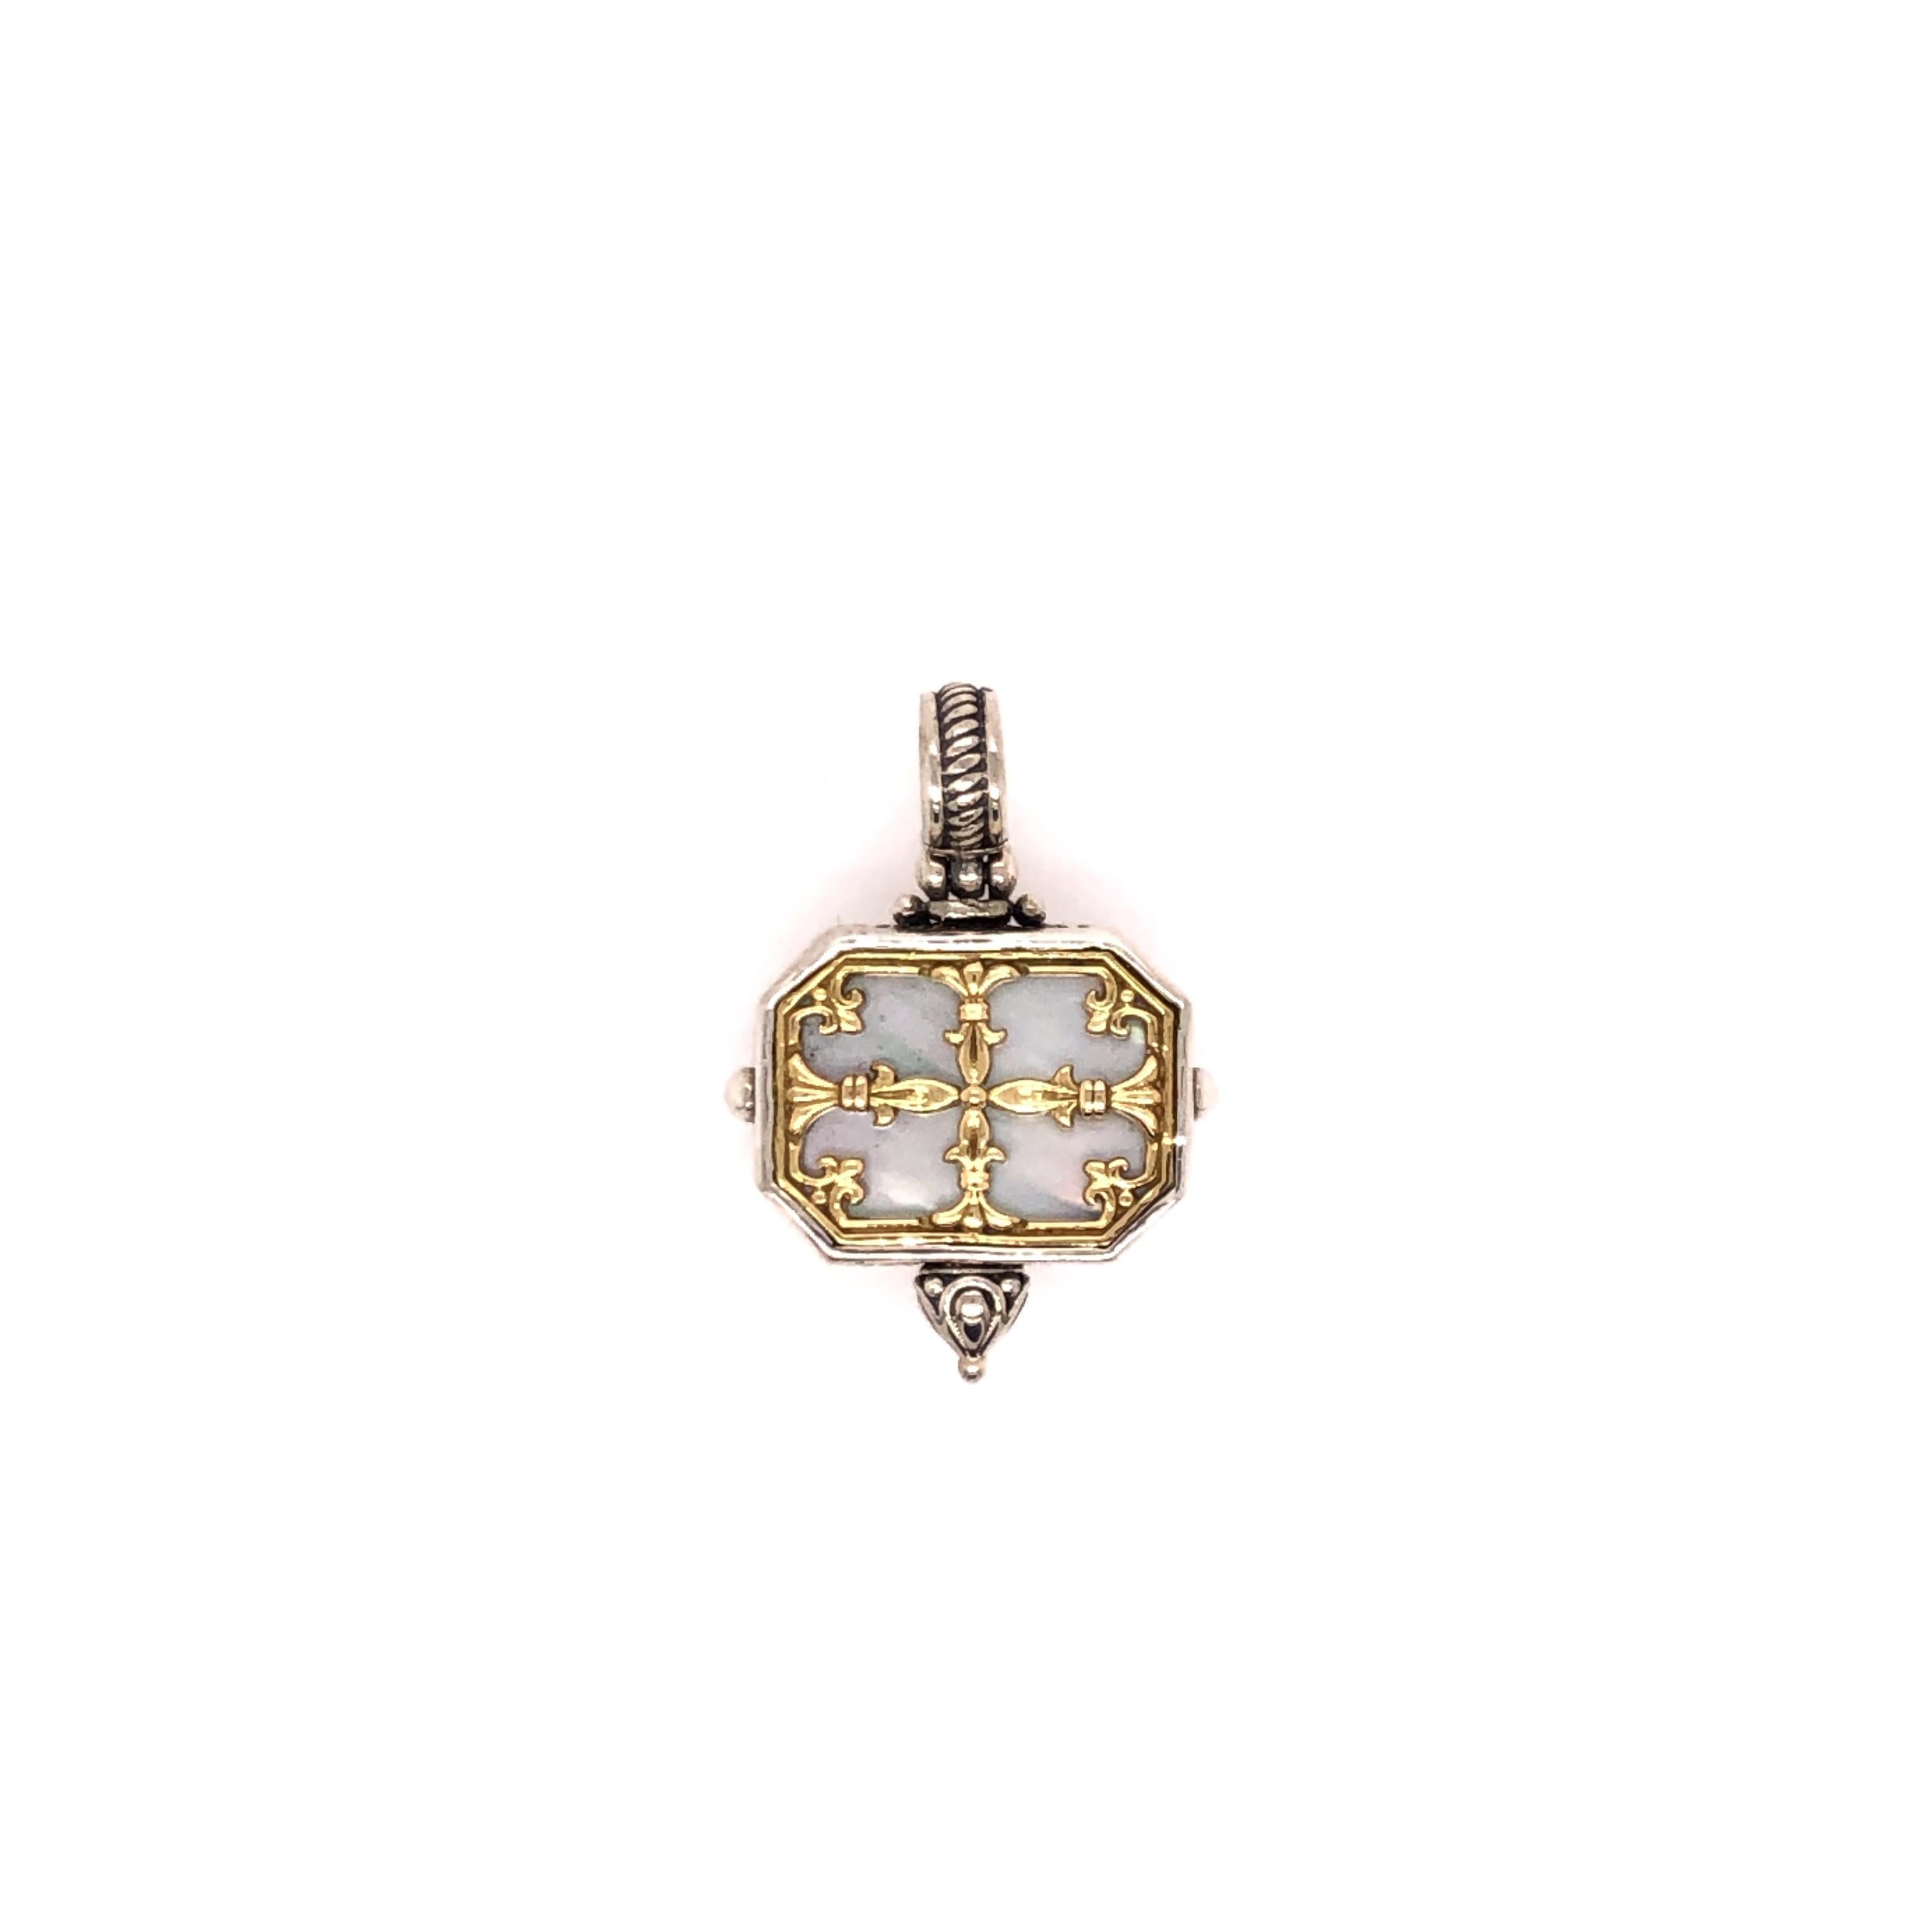 Gemstone: Mother of Pearl
Material: Sterling Silver & 18k Gold
Size: One Size

Stamped: 750, 925, KONSTANTINO